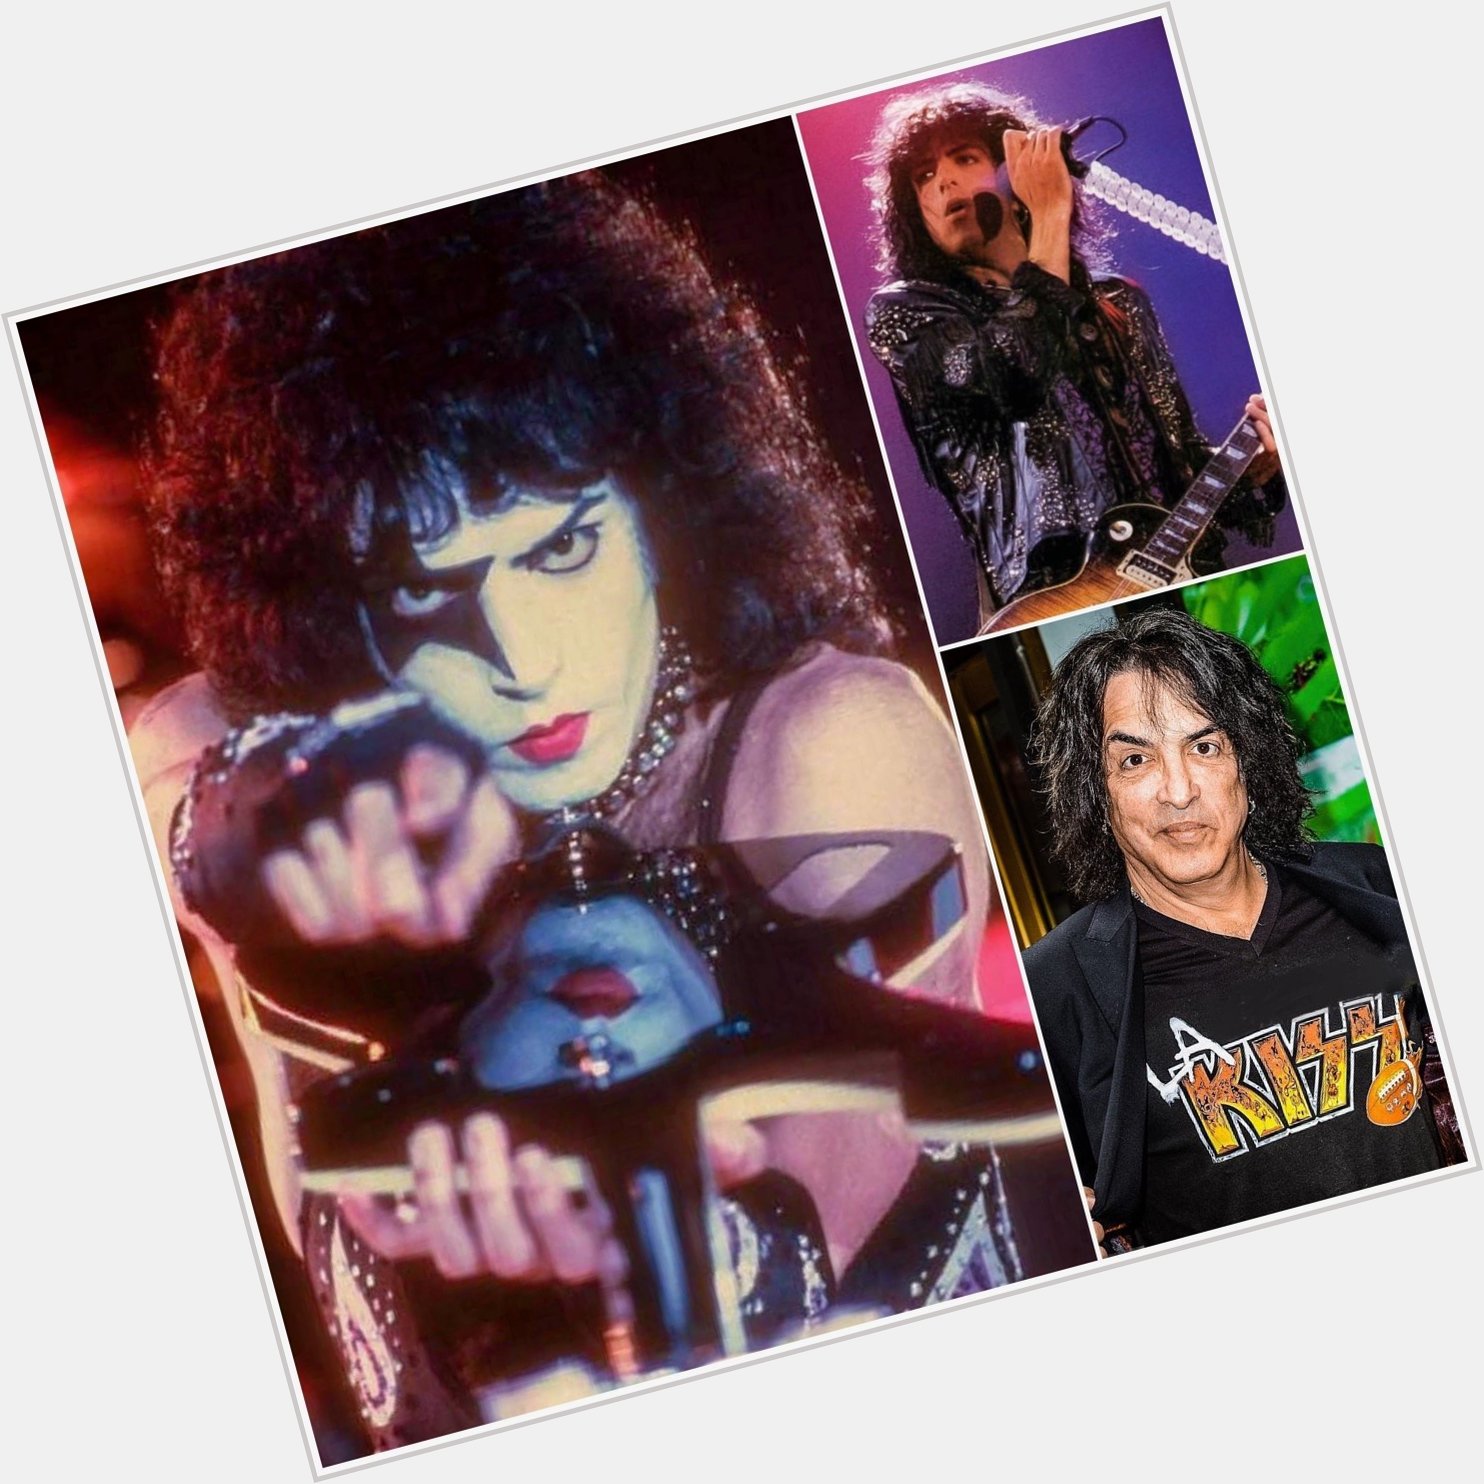 Happy 71st birthday to Stanley Eisen, or as you know him, Paul Stanley of Kiss! 